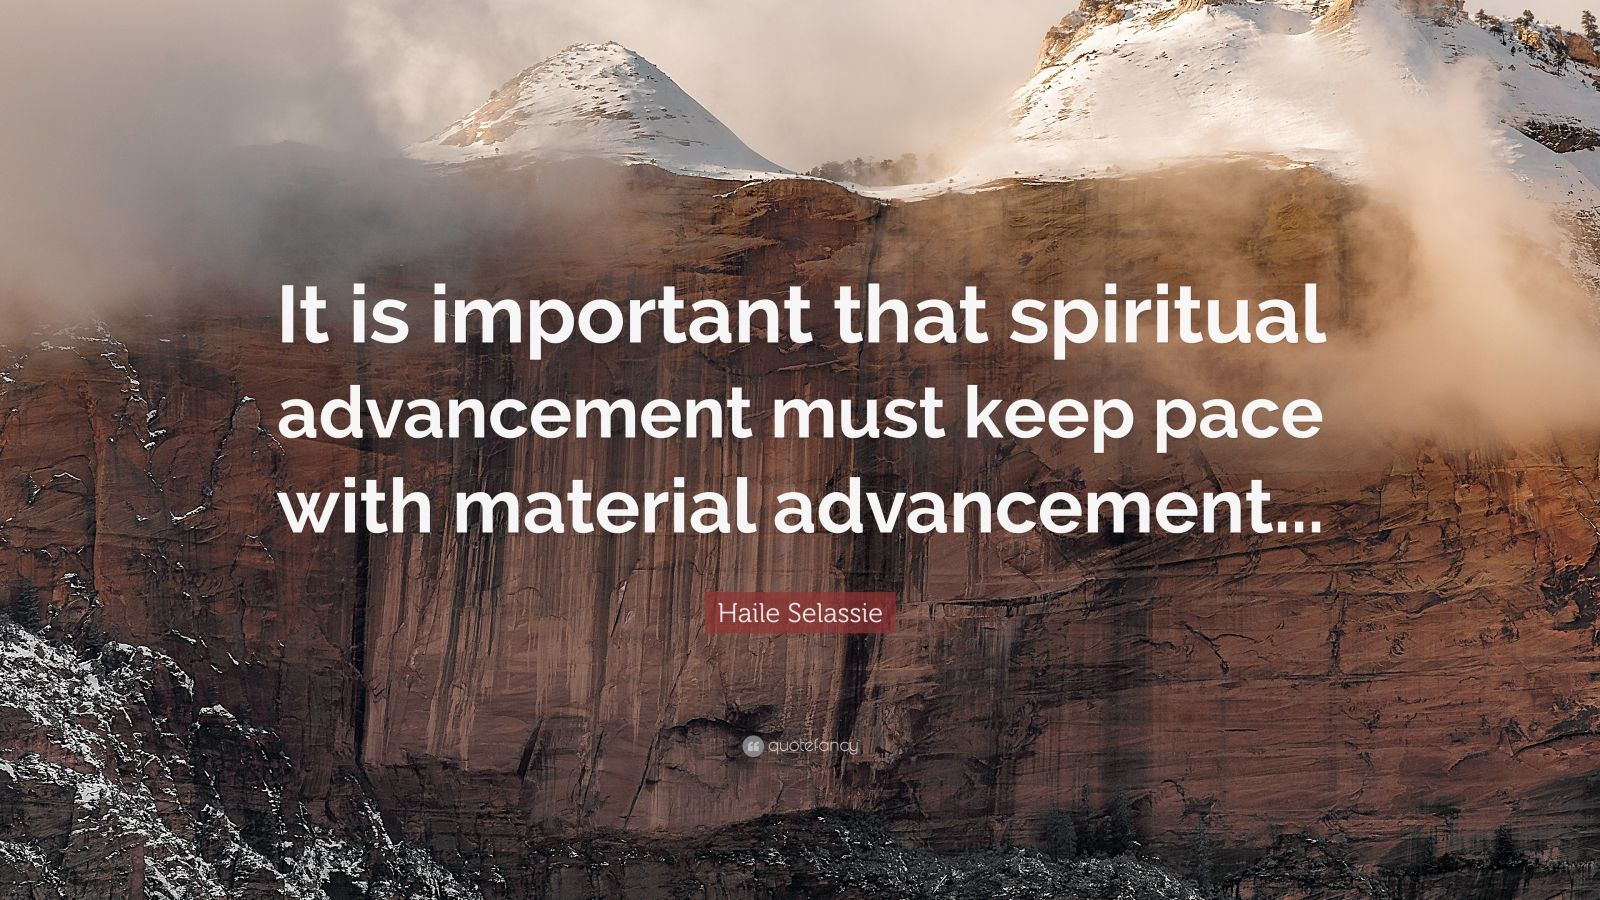 Haile Selassie Quote: “It is important that spiritual advancement must ...